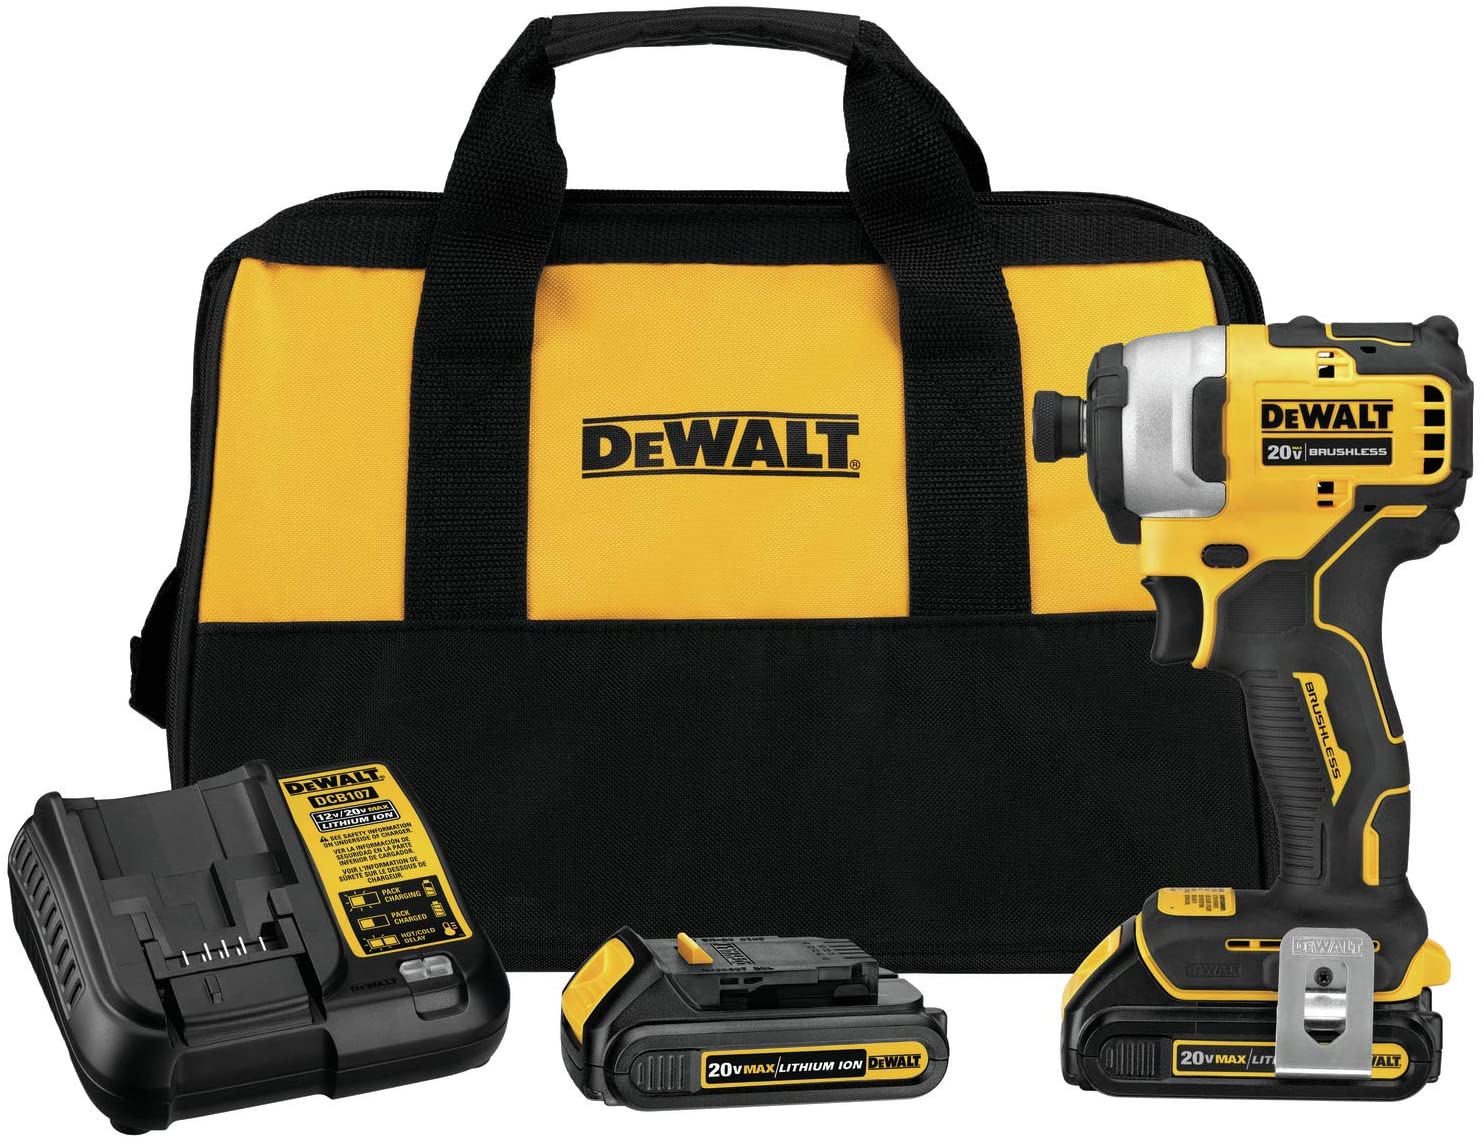 DEWALT DCF809C2 Atomic 20V Max Lithium-Ion Brushless Cordless Compact 1/4 in. Impact Driver Kit W/ 2 Batteries